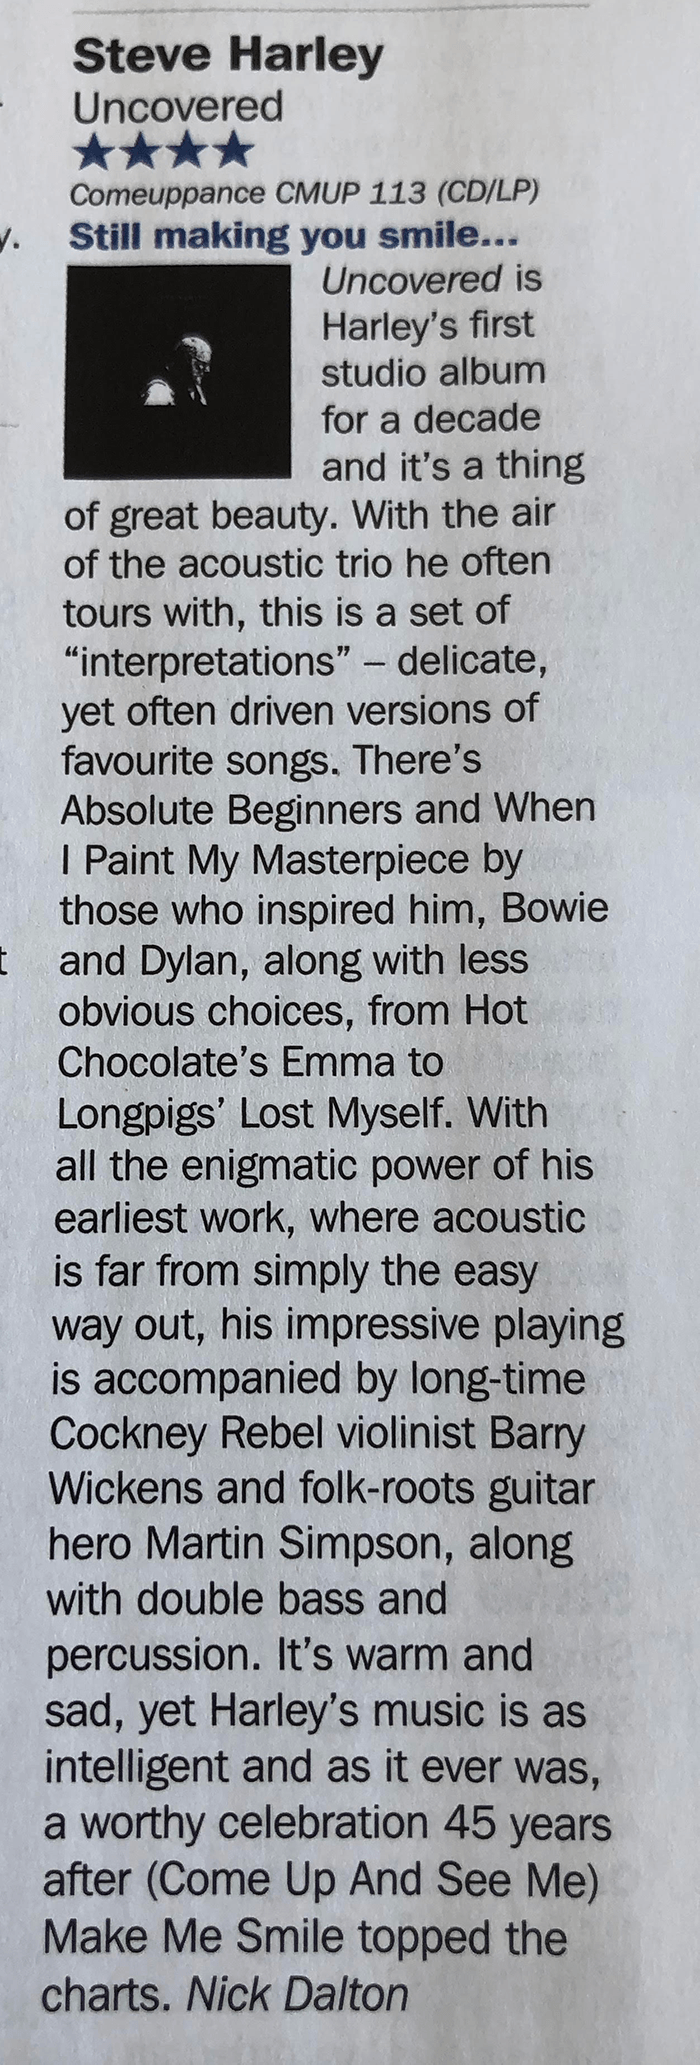 “It’s A Thing Of Great Beauty” – Record Collector review